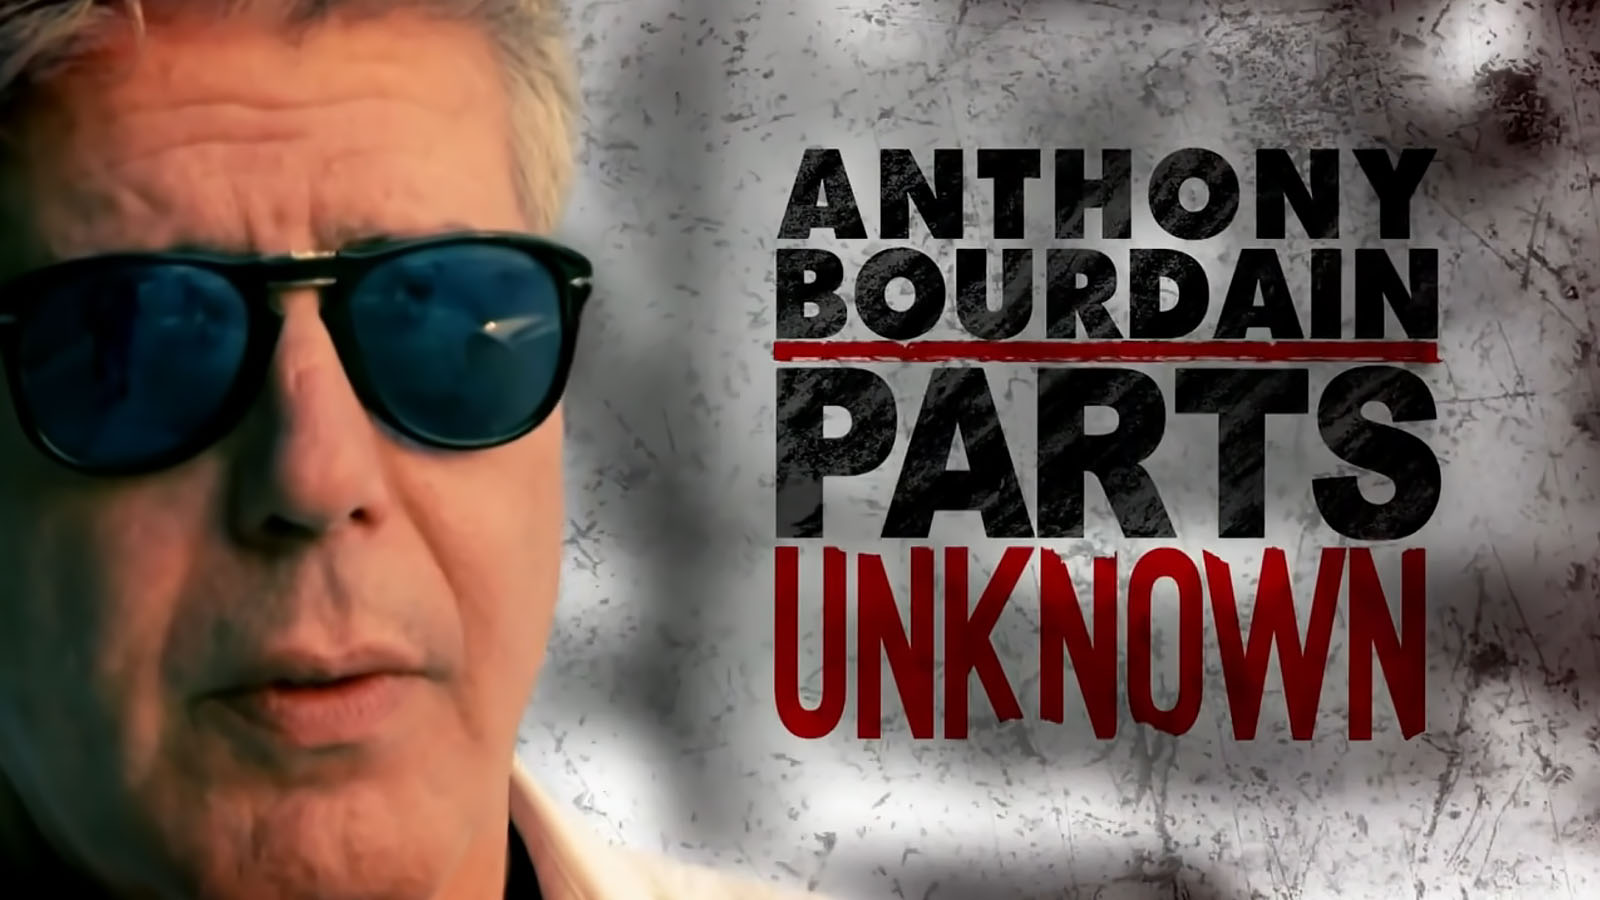 Anthony Bourdain is probably known best for food shows like Parts Unknown and No Reservations.